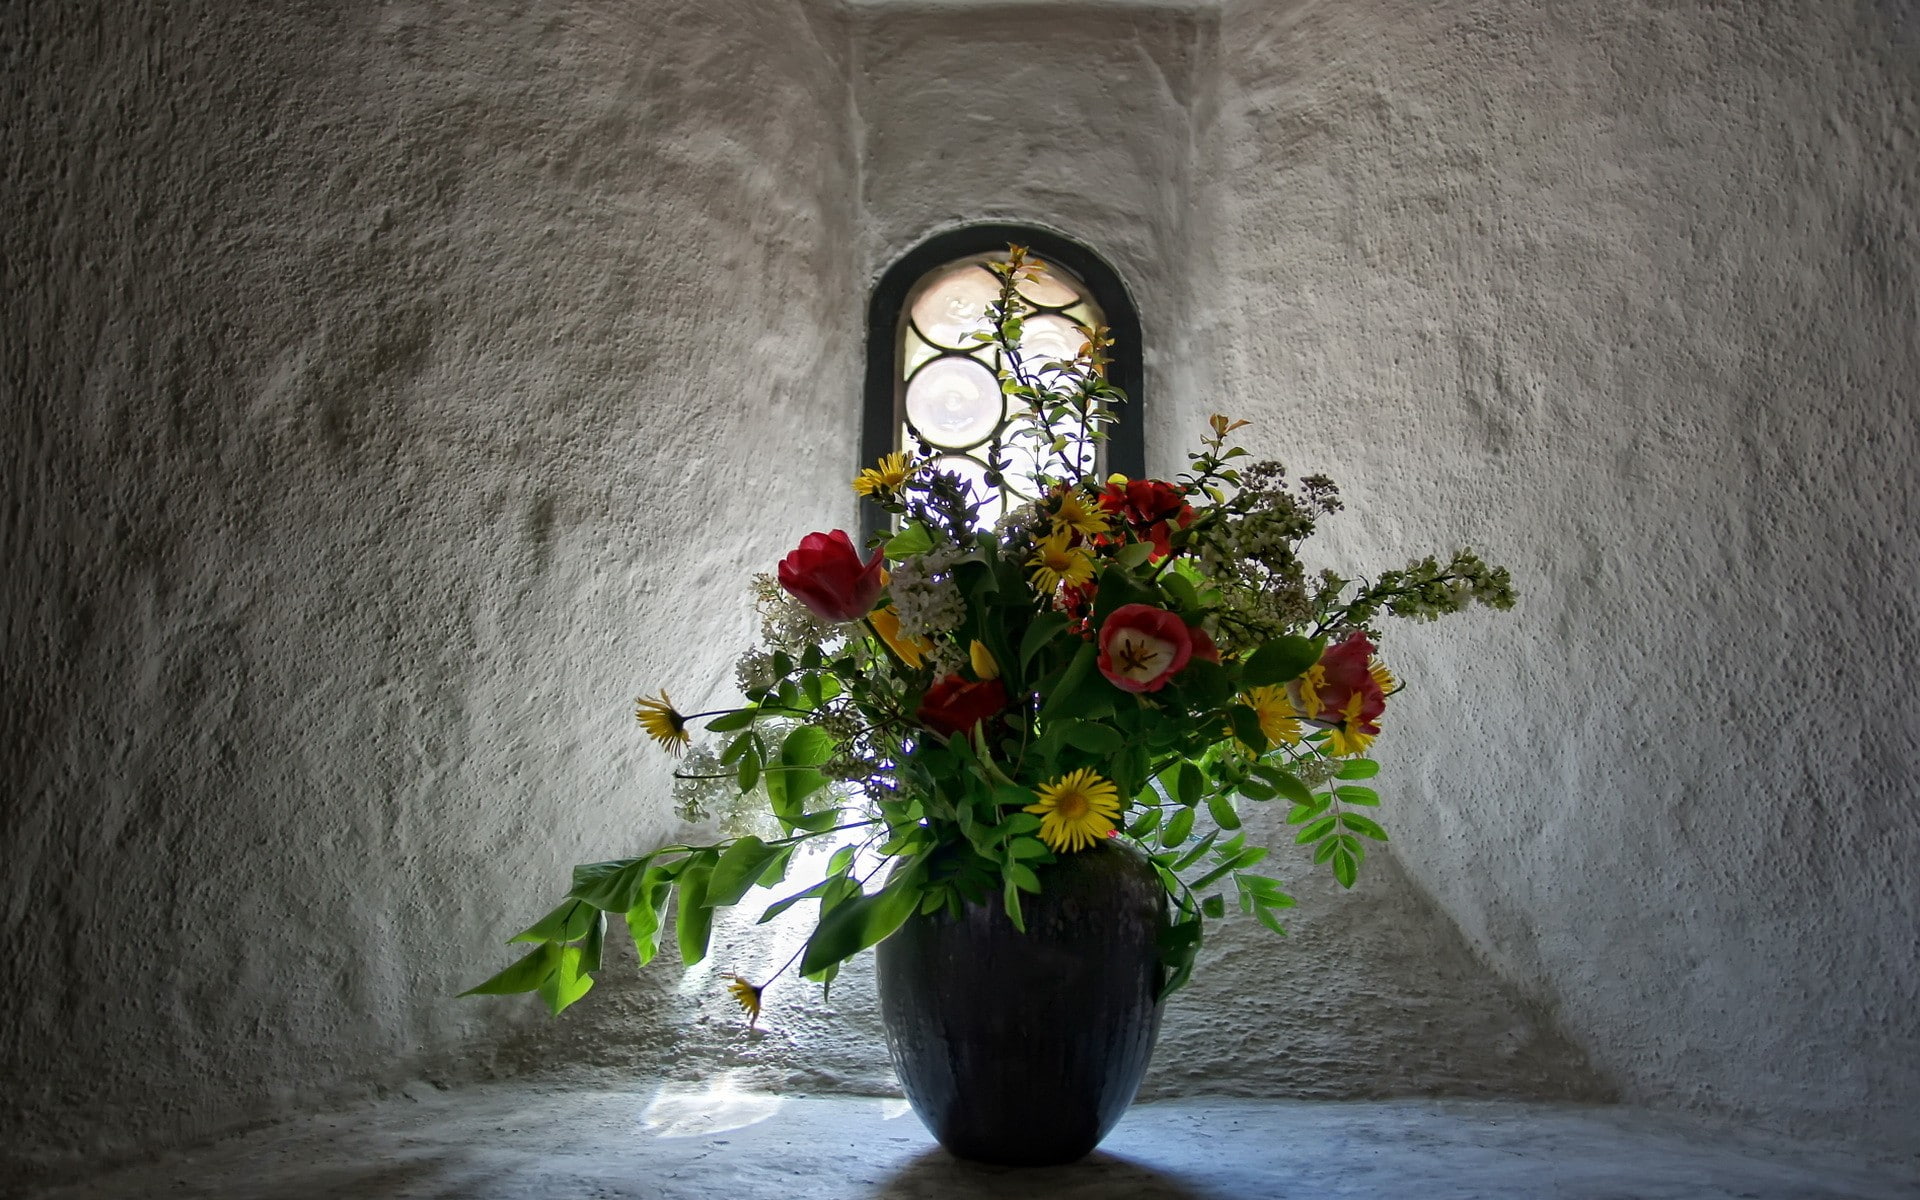 window, flowers, flowering plant, vase, nature, wall - building feature